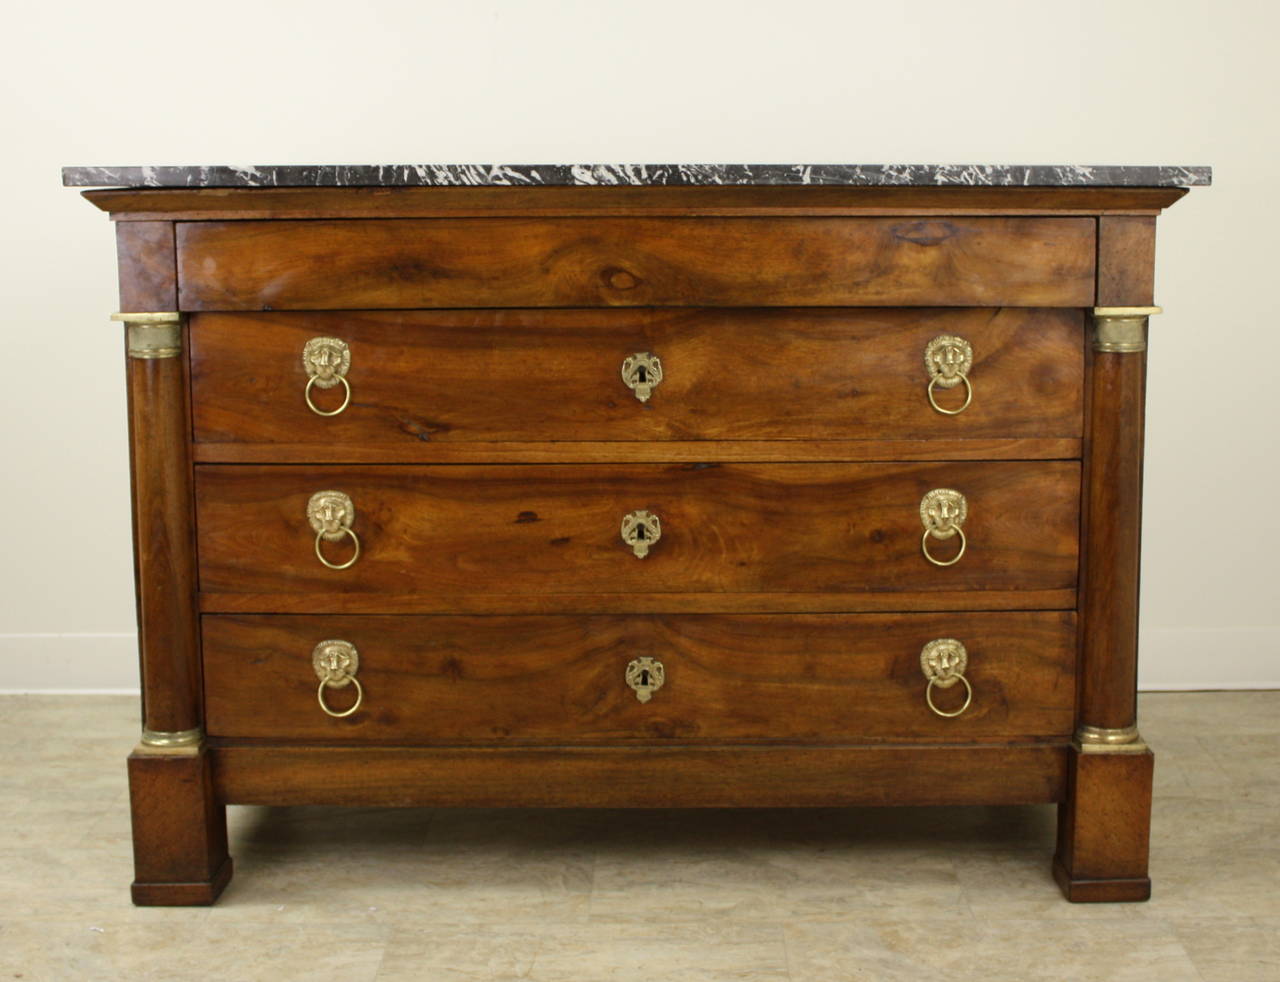 Stunning period commode.  The walnut is warm and glowing, complemented with ormolu handles and decoration.  The original marble is an appropriate veined black.  Overall, this is a very elegant piece.  Drawers slide smoothly.  Very fine.